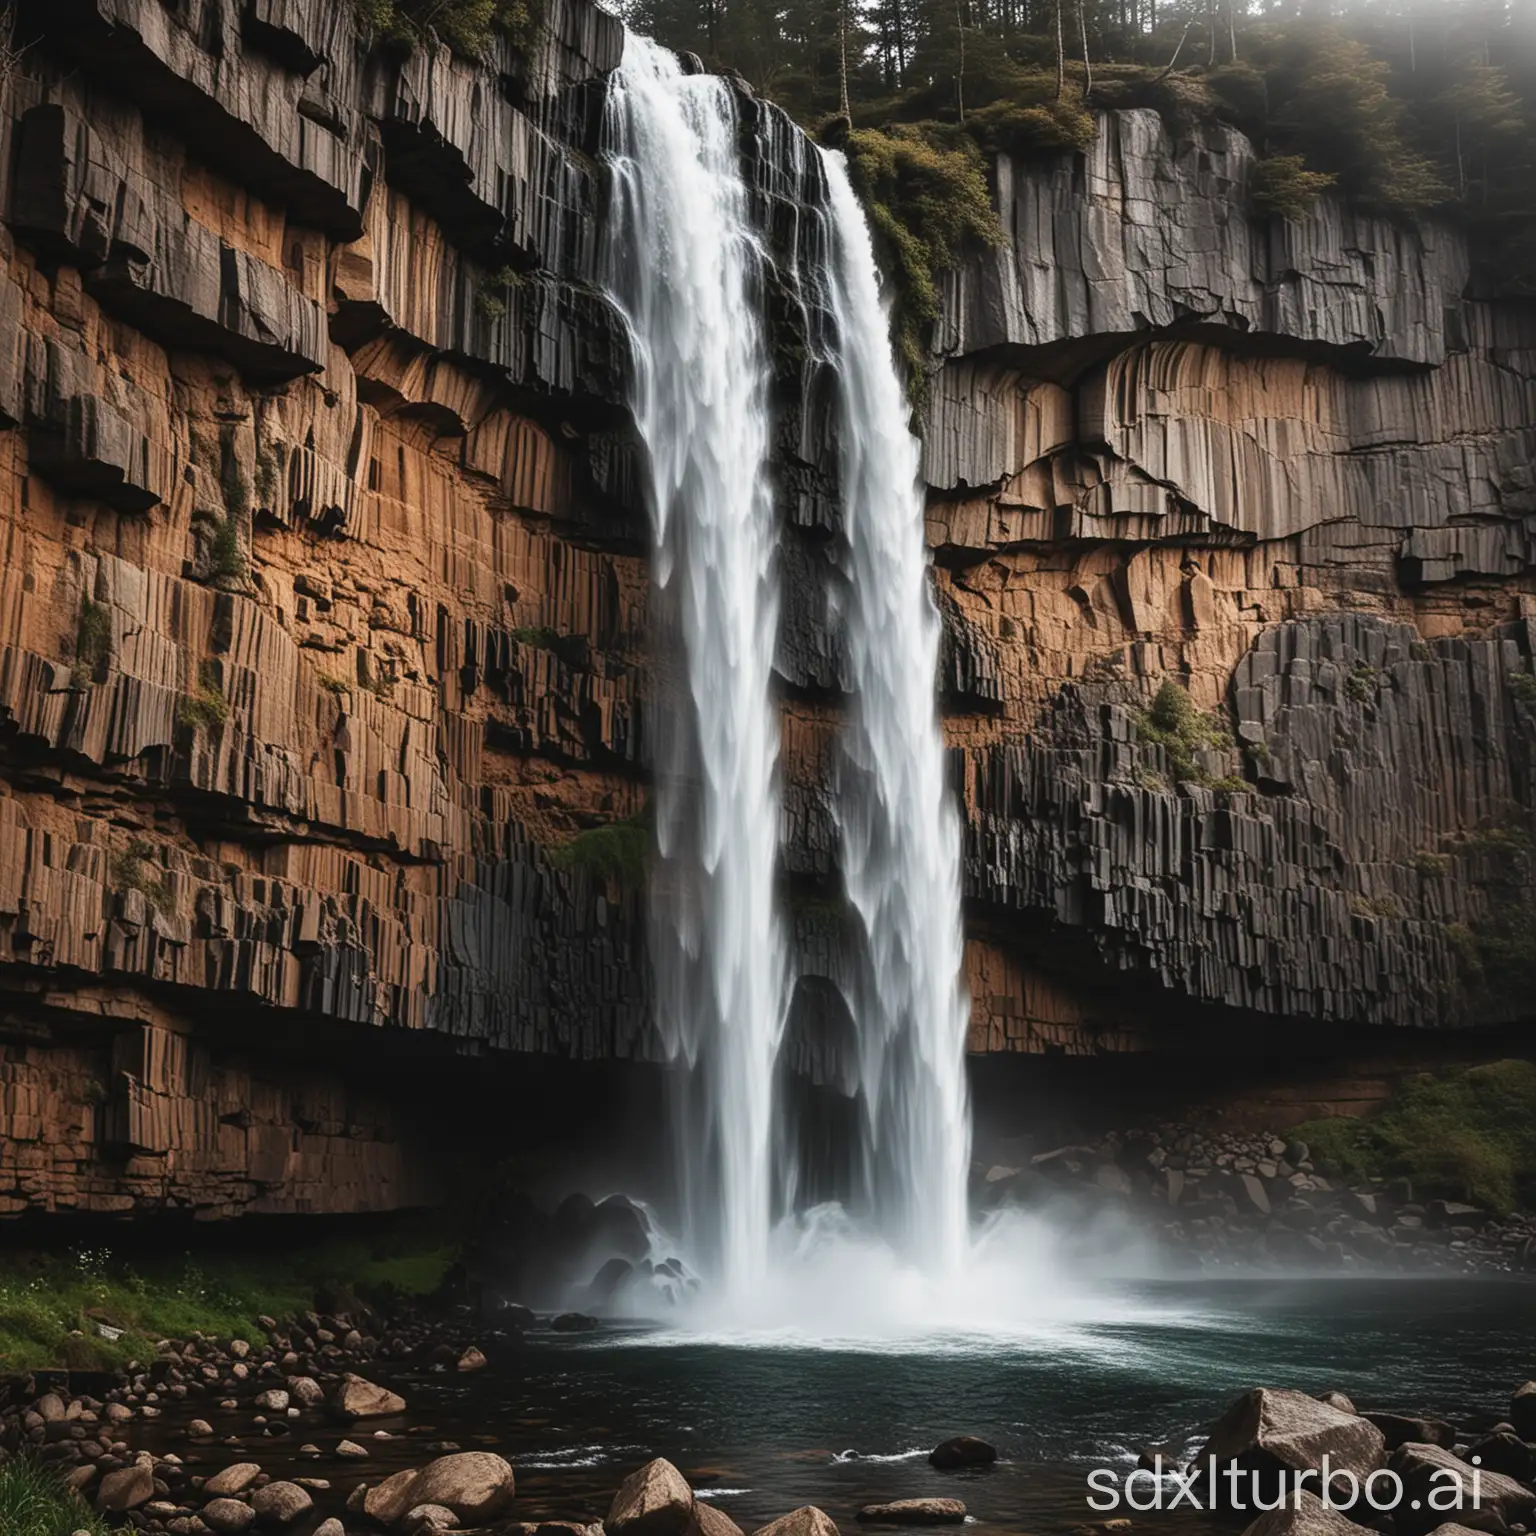 Dramatic shot of a powerful waterfall cascading over a rocky cliff face.